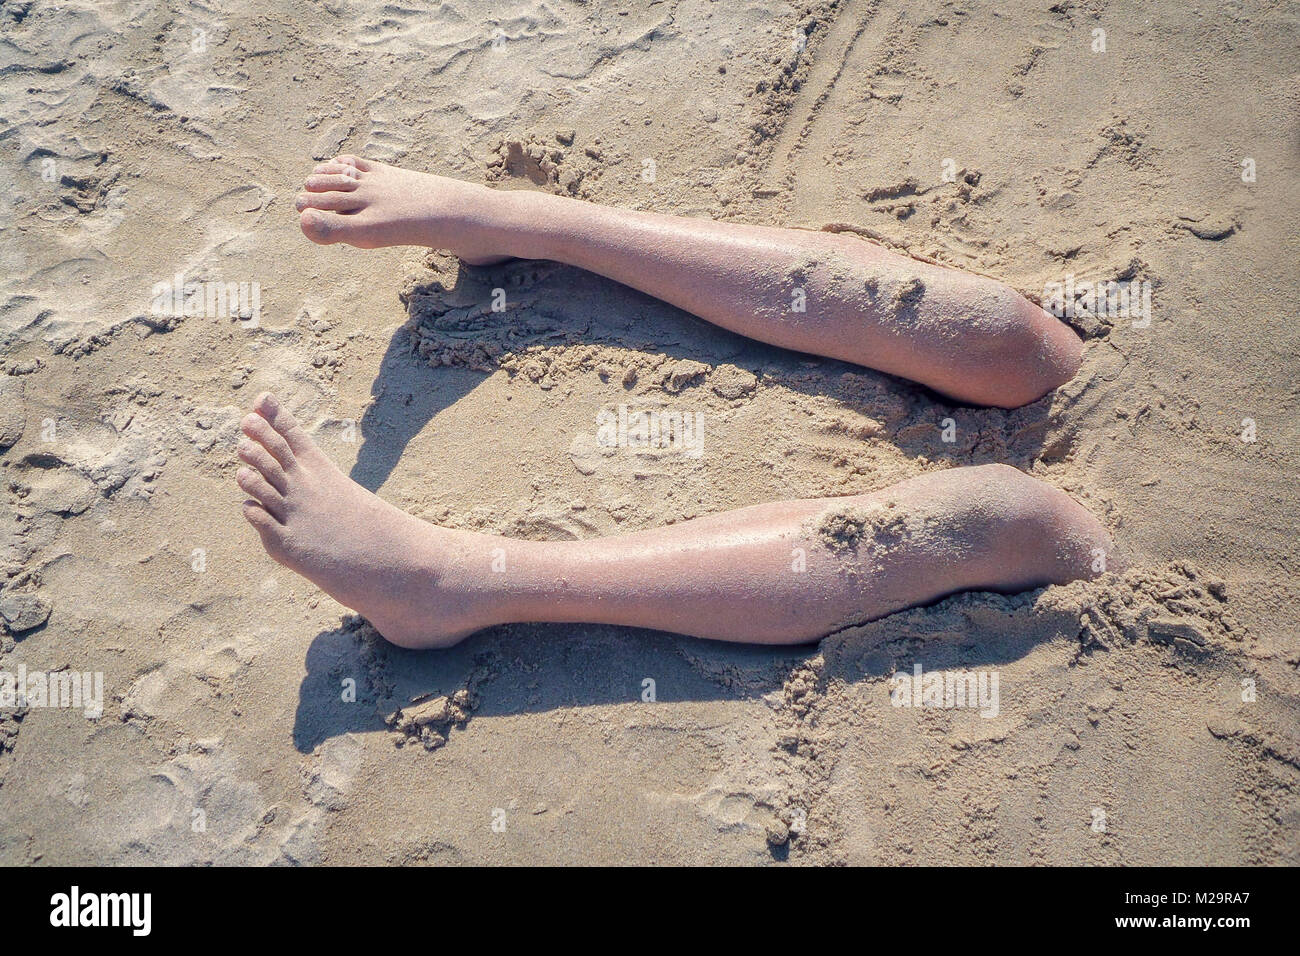 Legs of a boy buried in the sand of a beach, vintage style Stock Photo